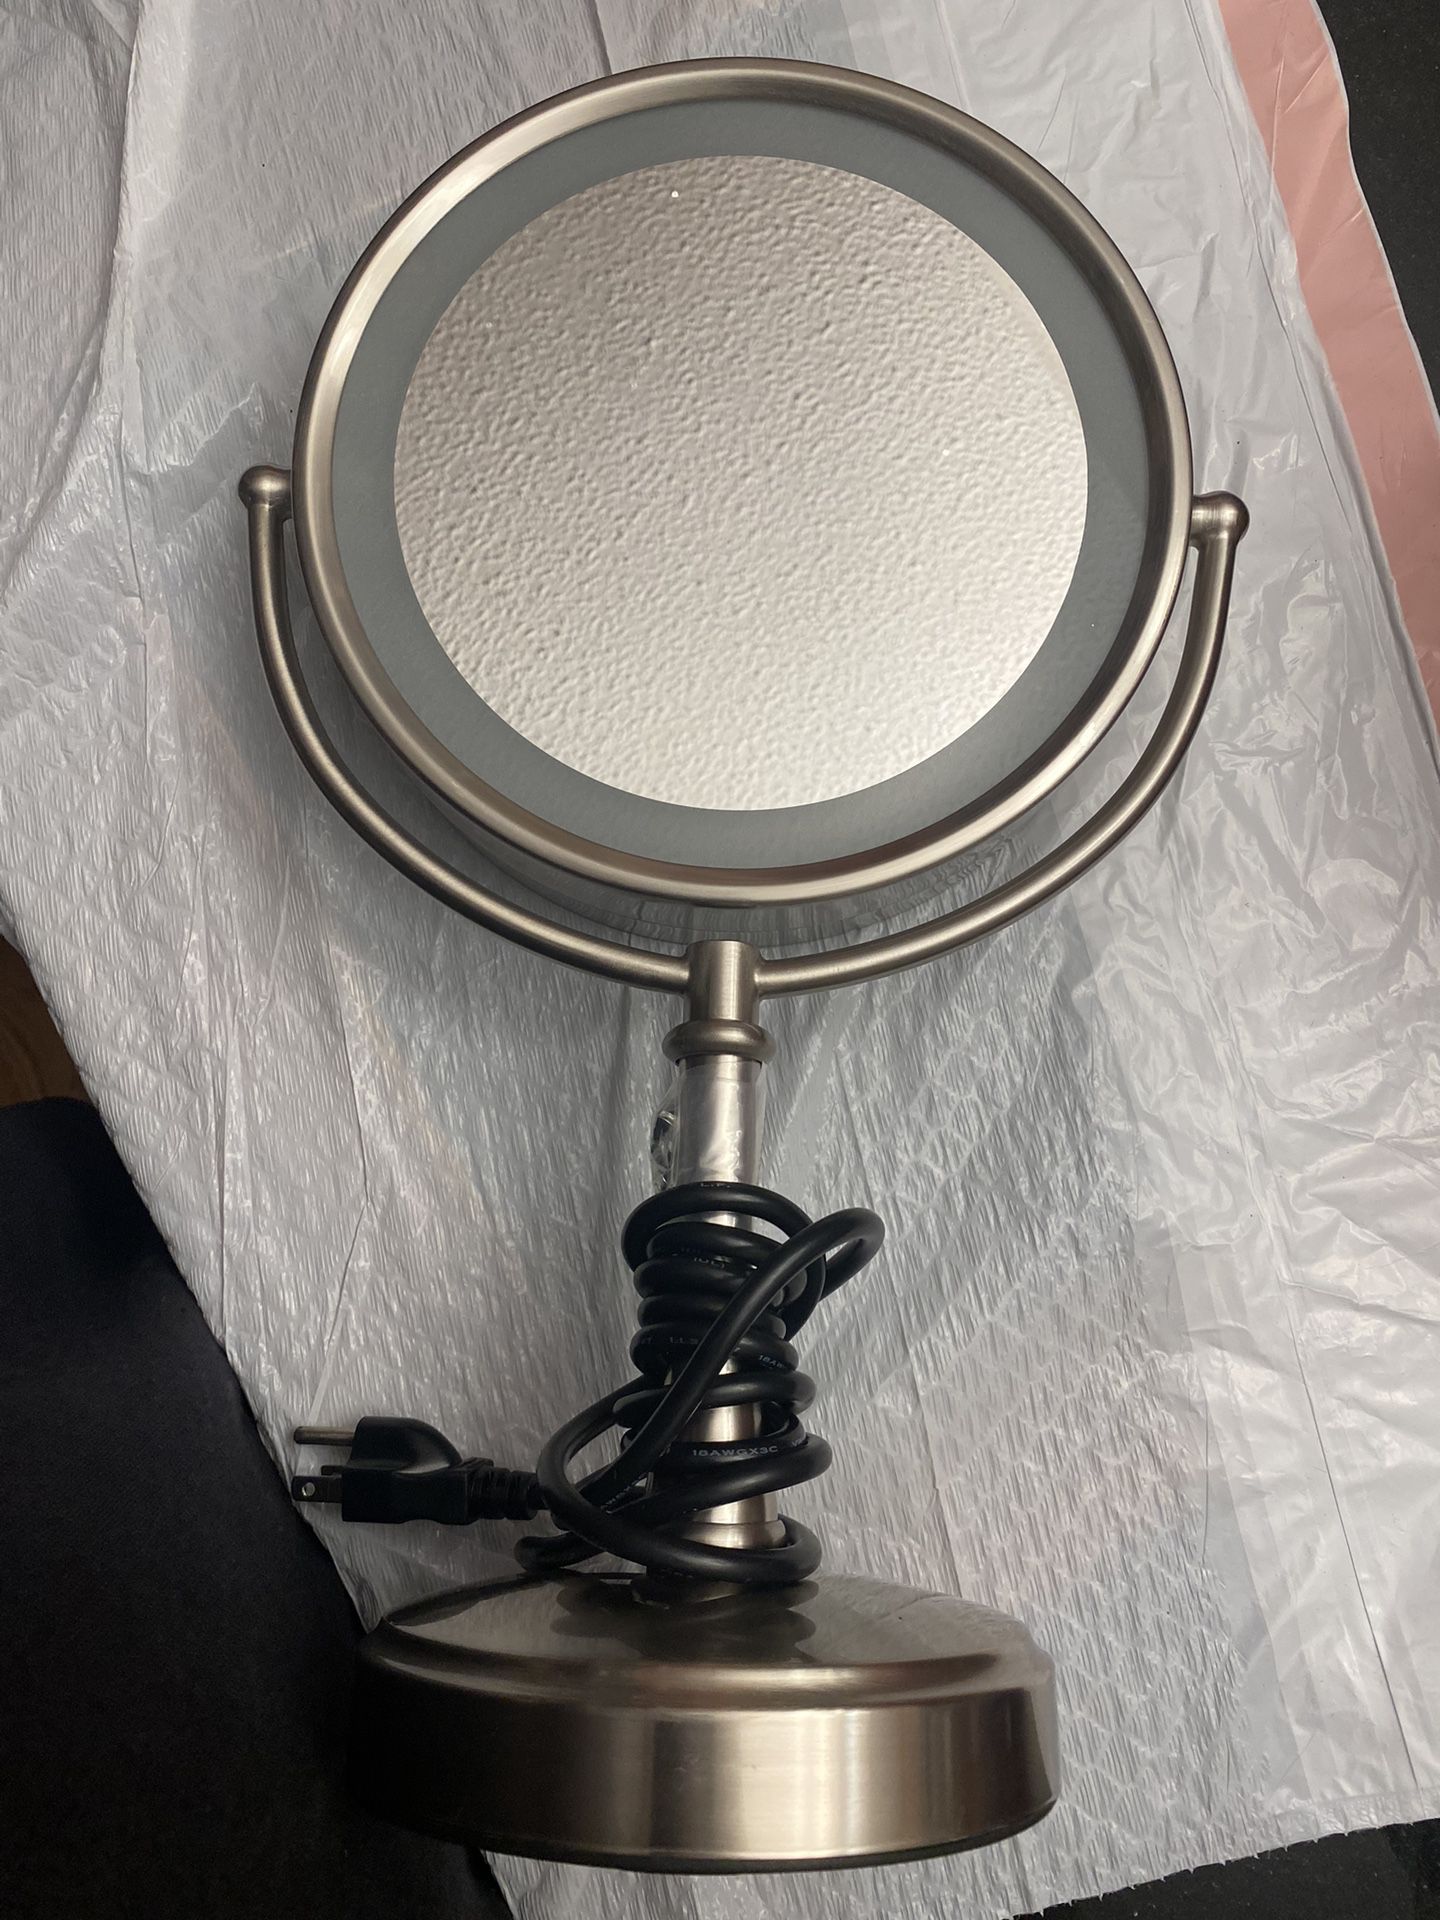 Conair Reflections Double-Sided LED Lighted Vanity Makeup Mirror, 1x/10x magnification, chrome Nickel plate light up mirror have to touch the base to 